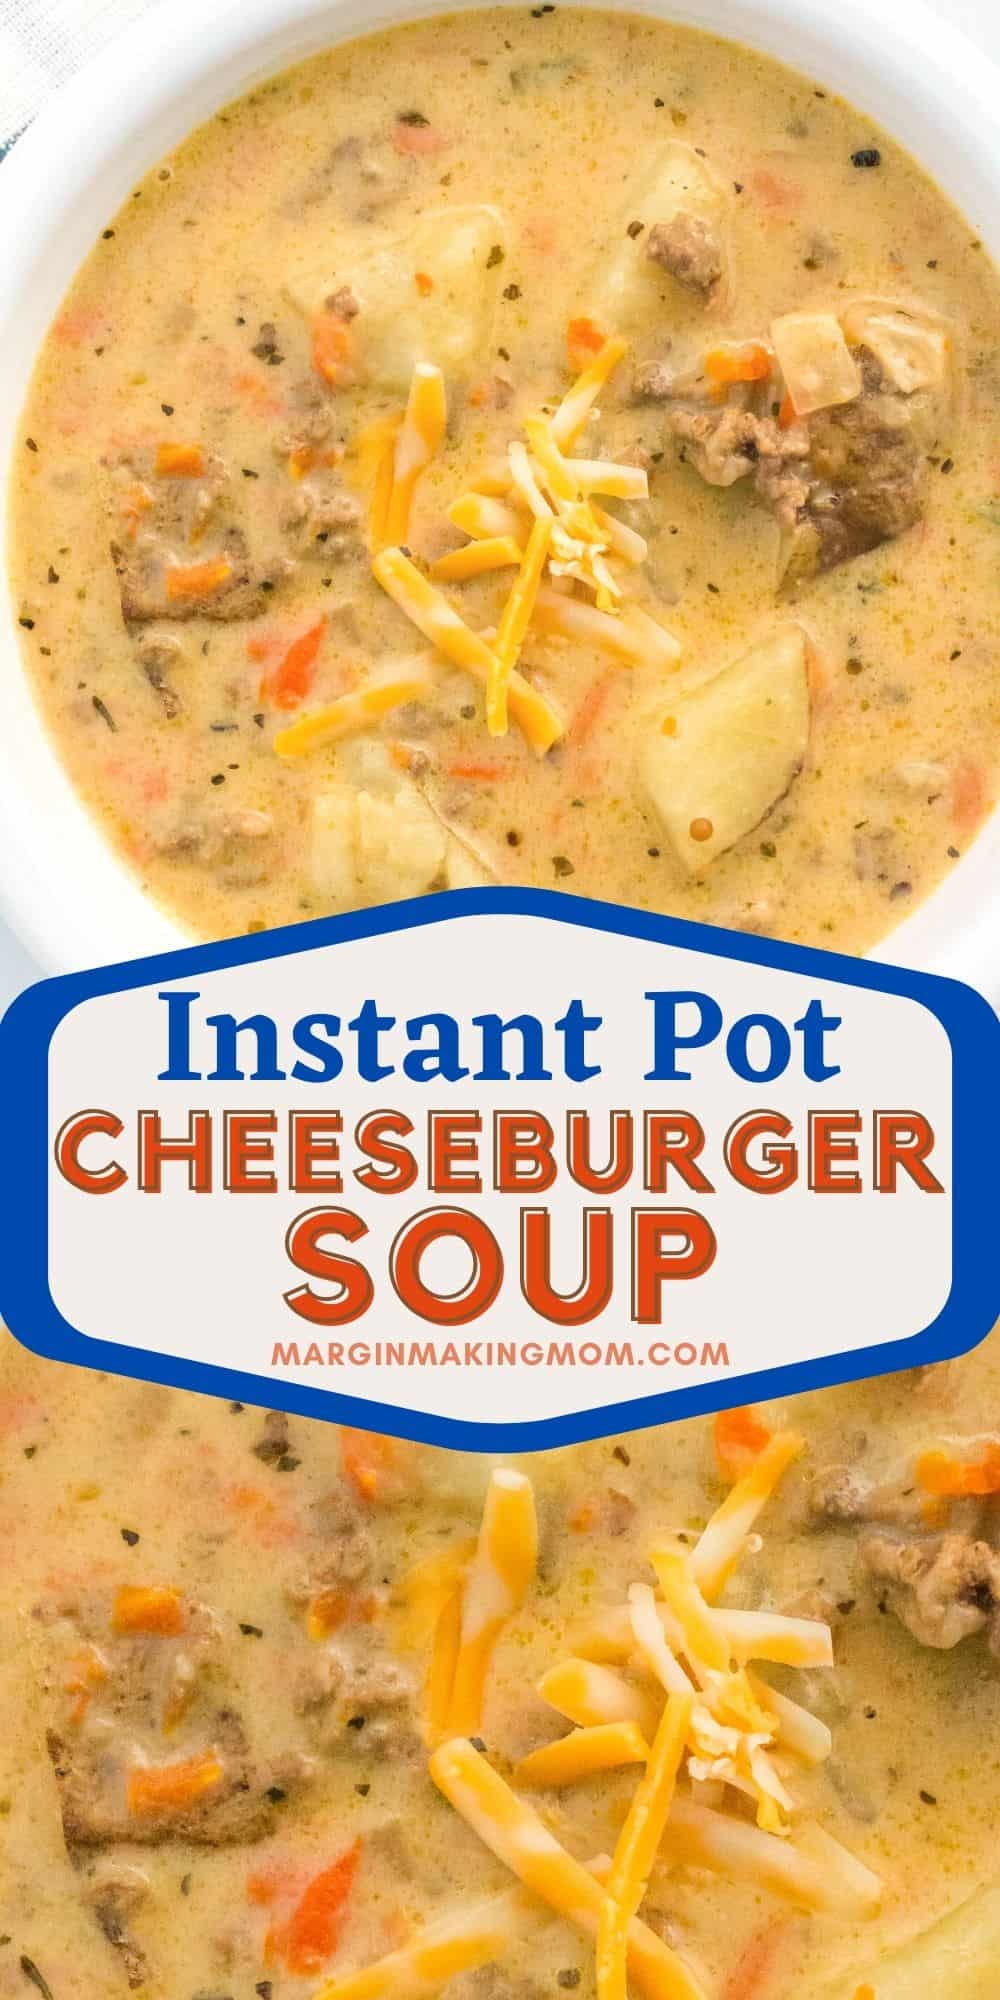 collage image featuring two photos of Instant Pot cheeseburger soup. One is a view of the bowl filled with soup, one is a close-up of the soup with shredded cheese on top